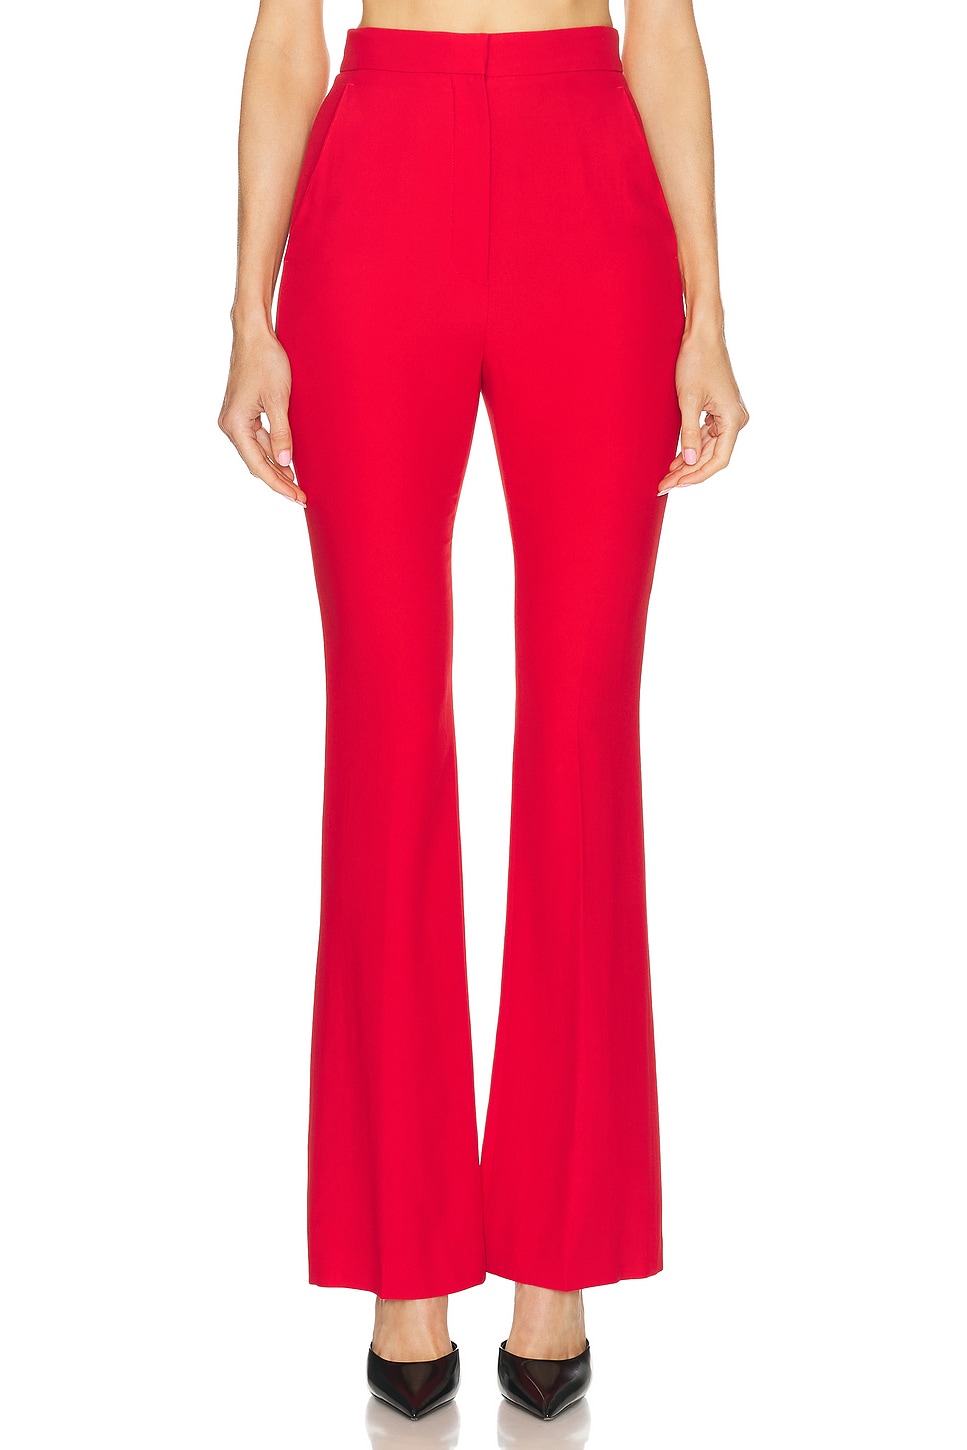 Image 1 of Alexander McQueen Crepe Trouser in Lust Red